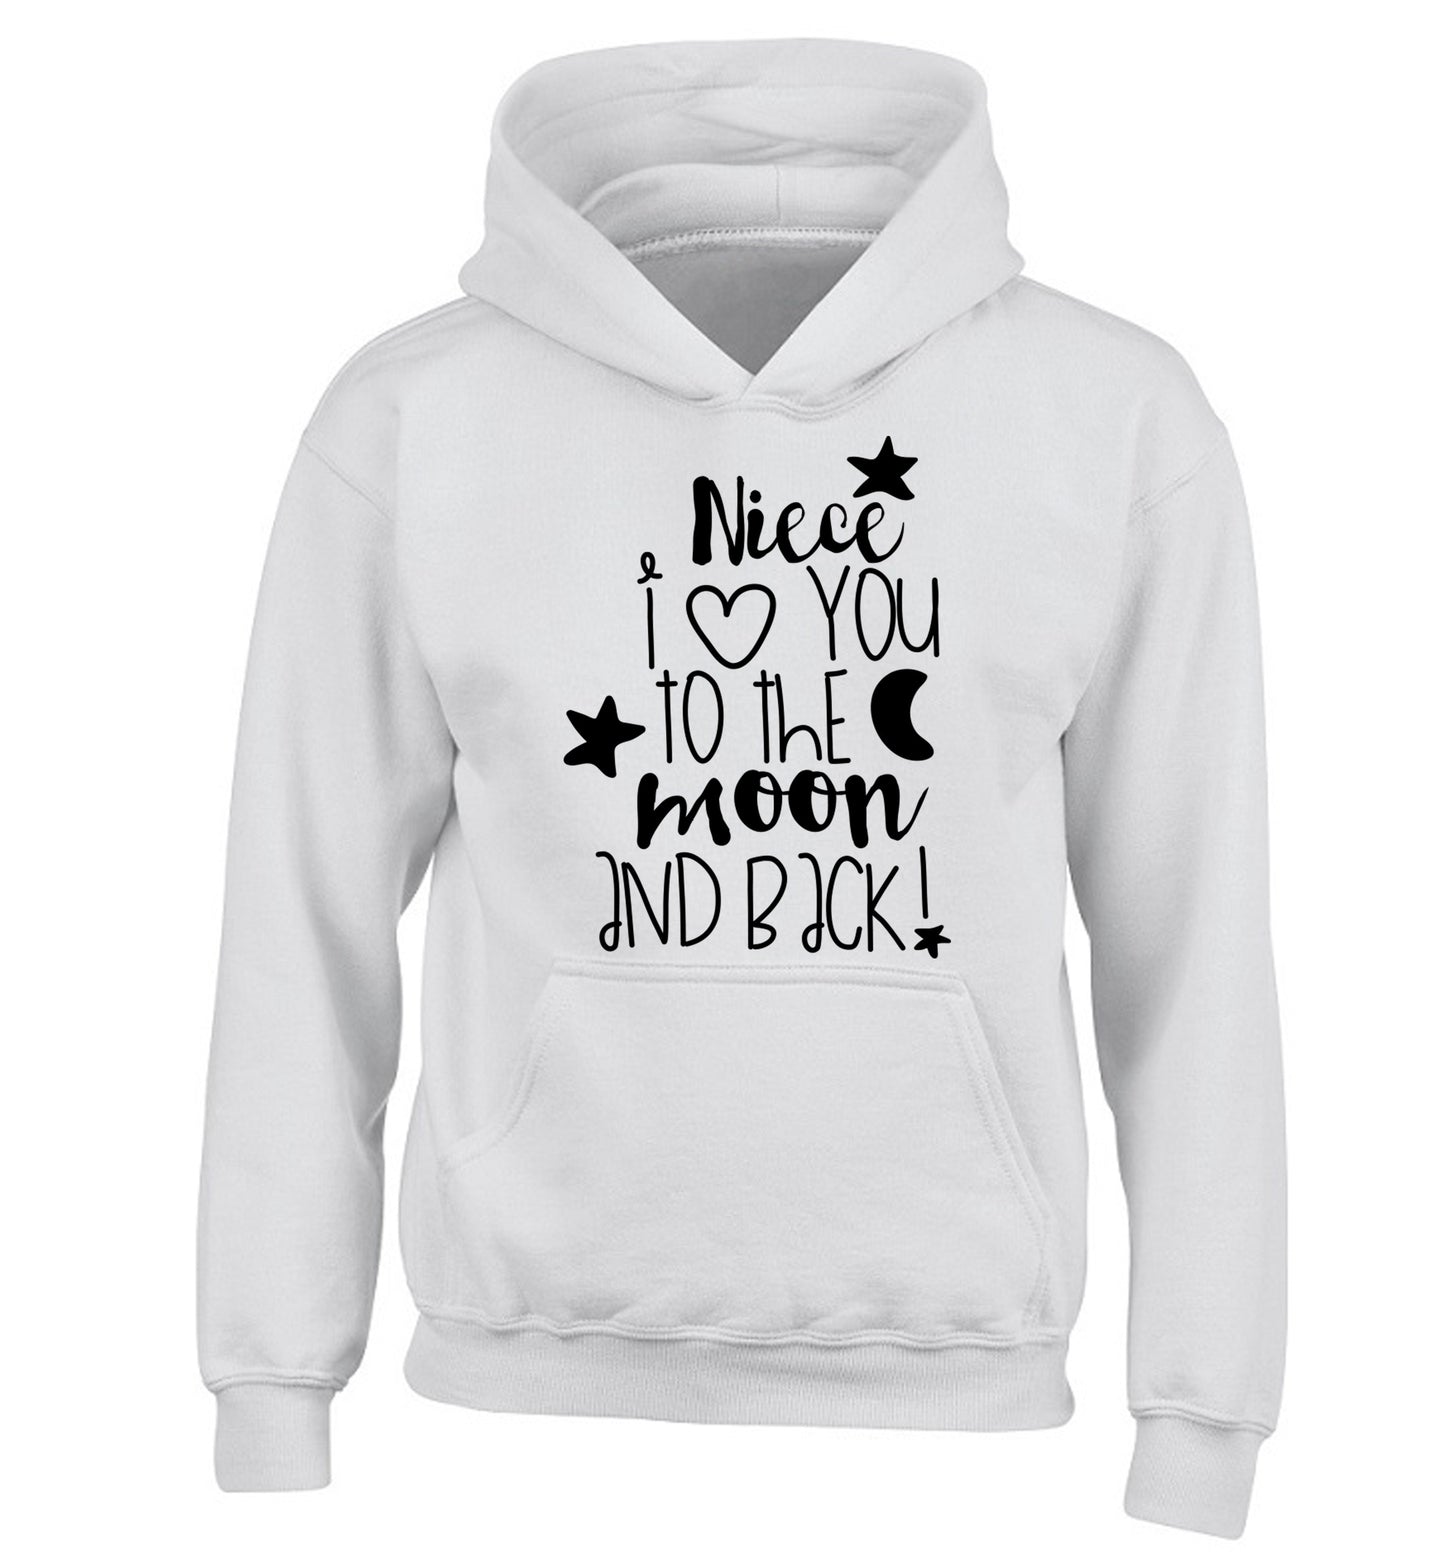 Niece I love you to the moon and back children's white hoodie 12-14 Years